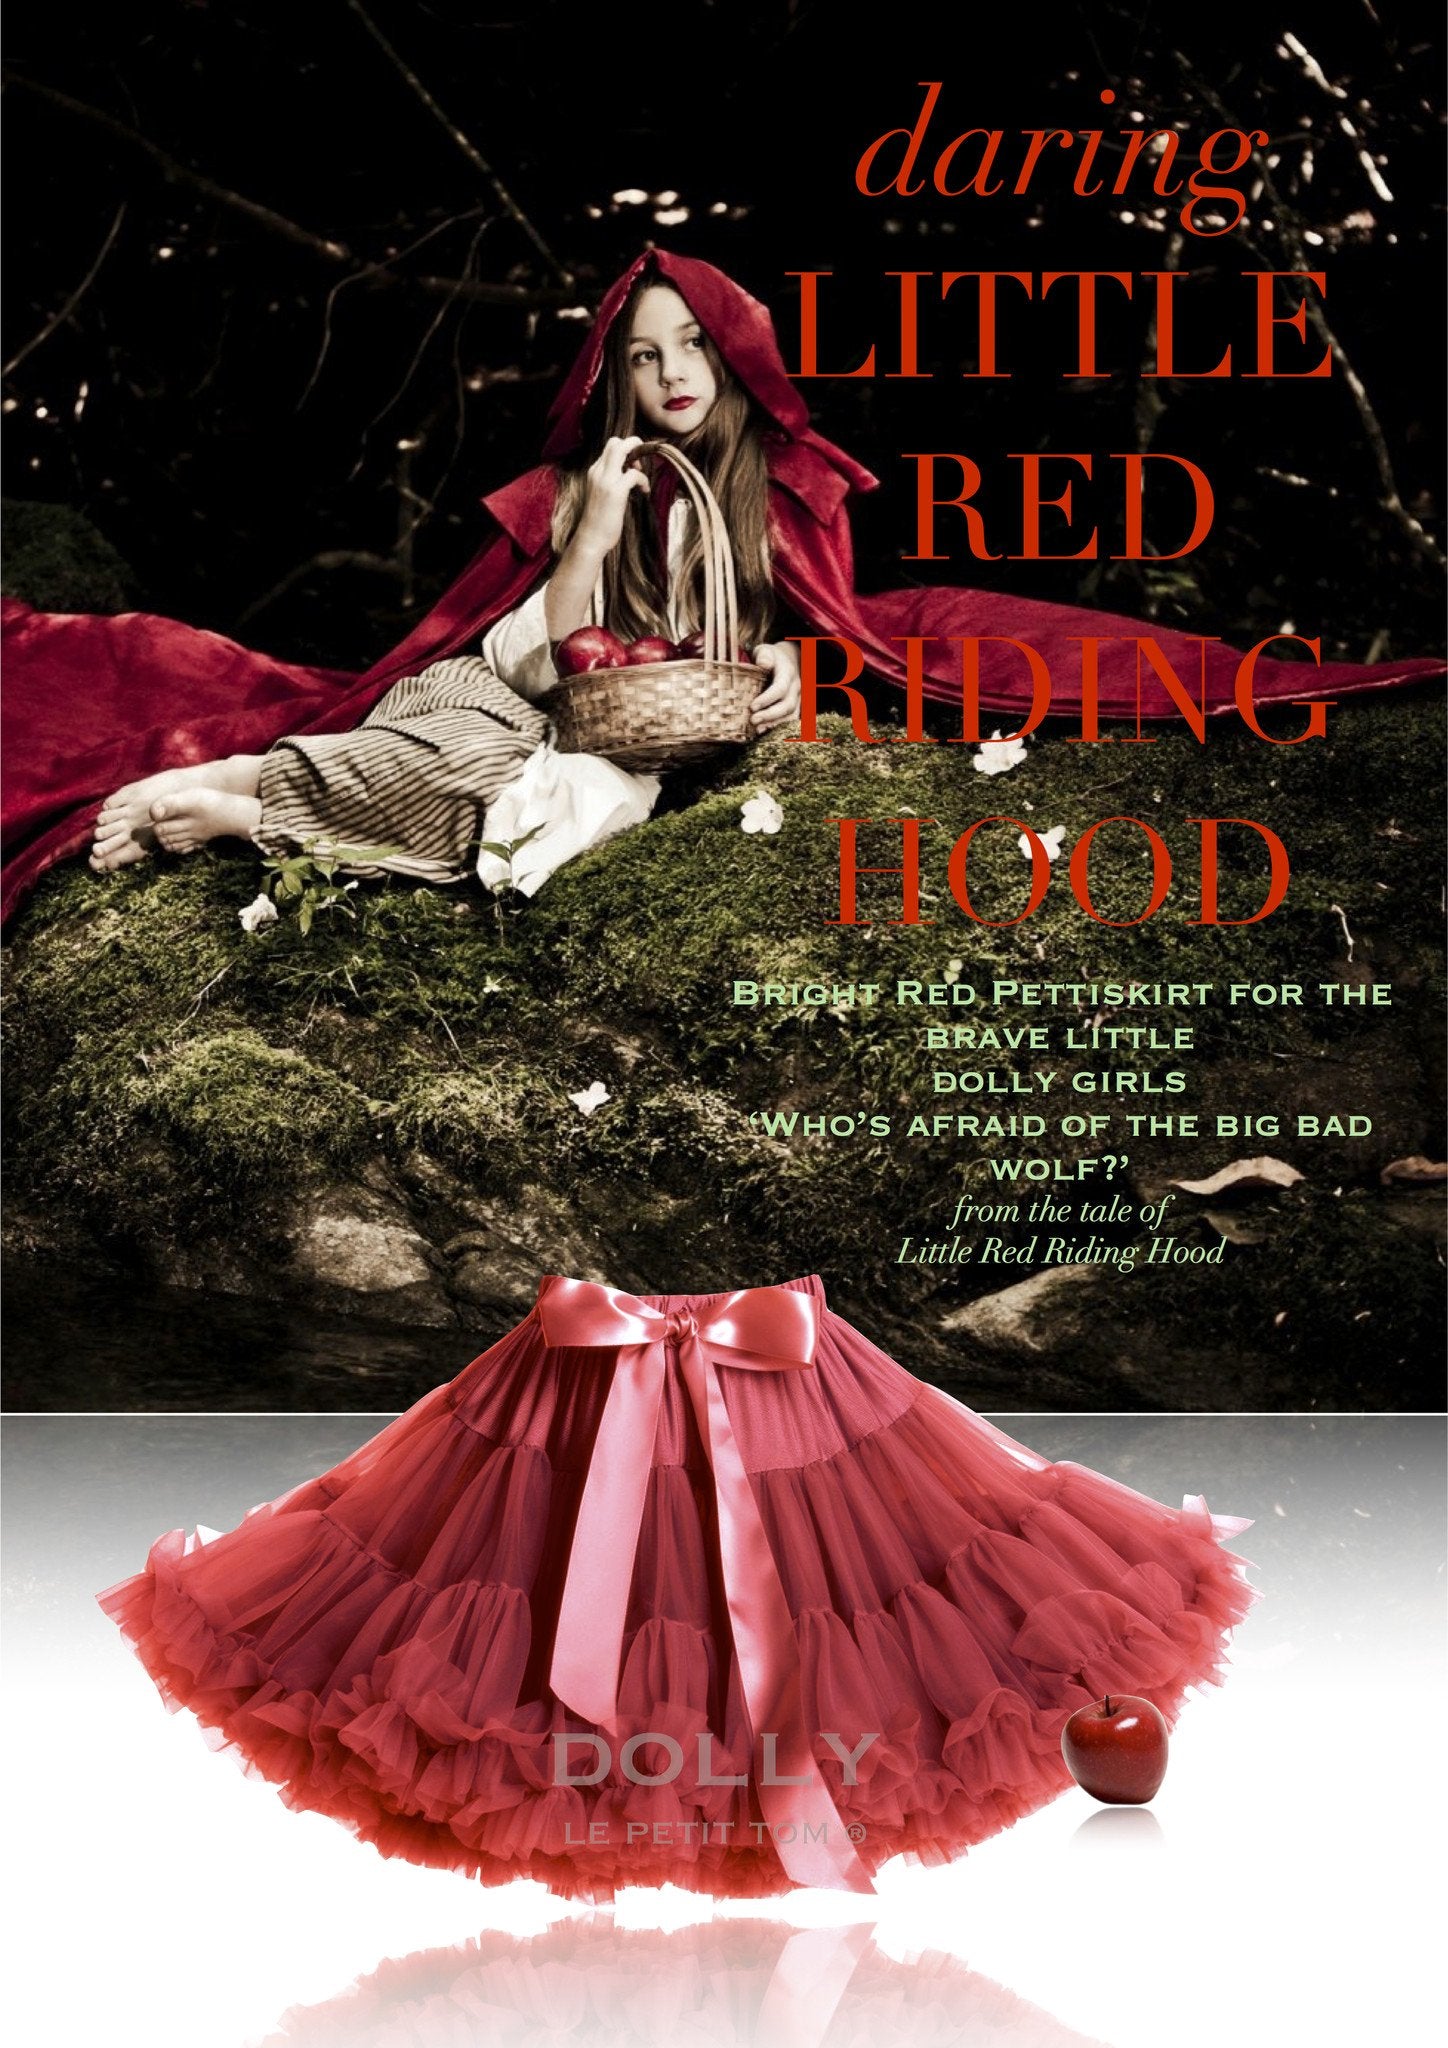 DOLLY by Le Petit Tom ® LITTLE RED RIDING HOOD pettiskirt red - DOLLY by Le Petit Tom ®